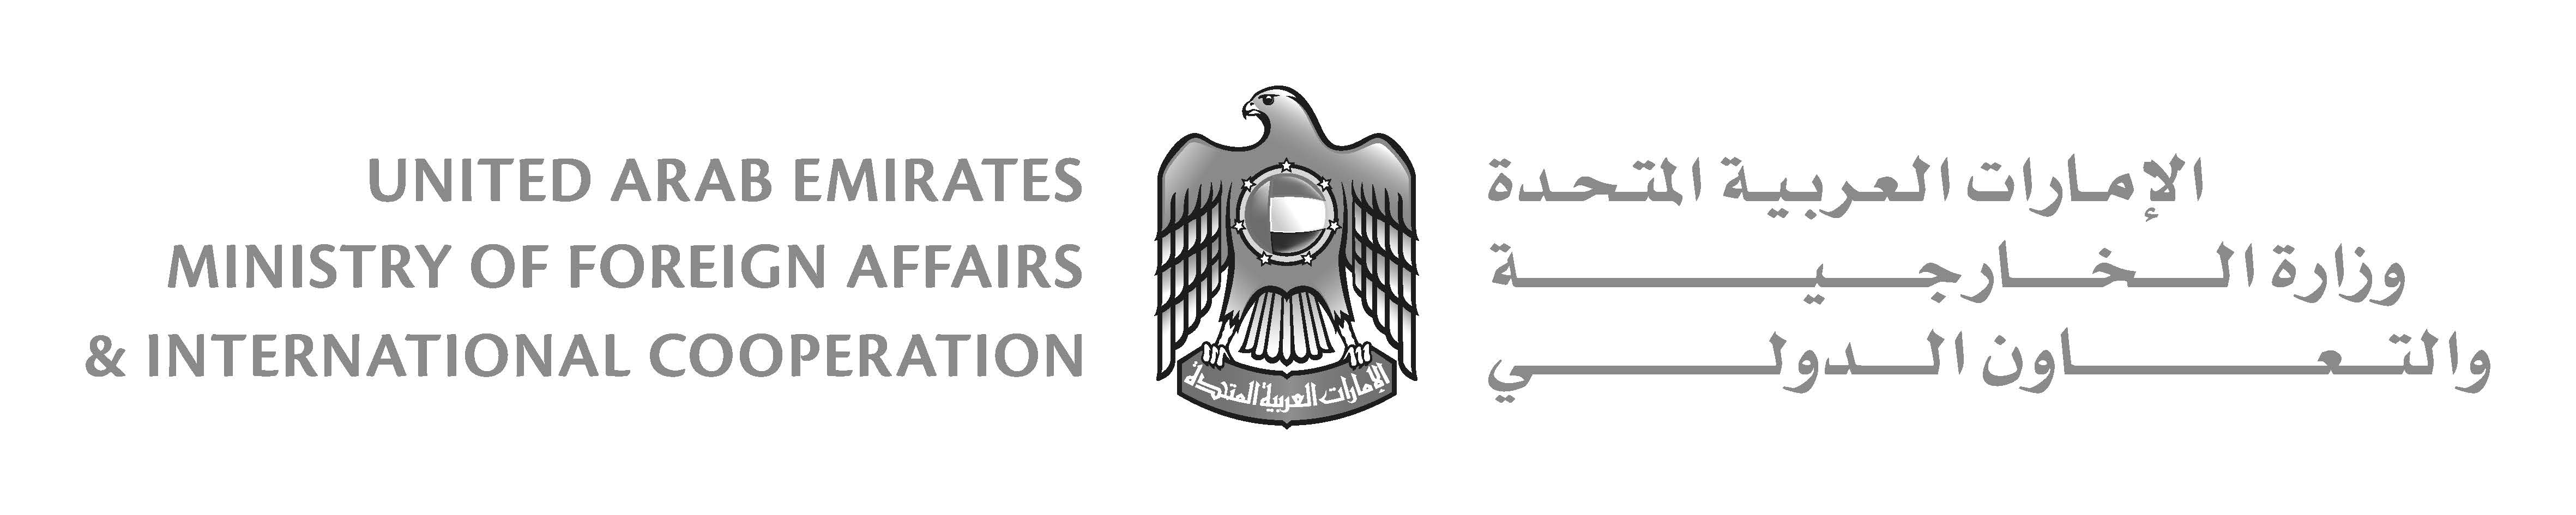 UAE Ministry of Foreign Affairs